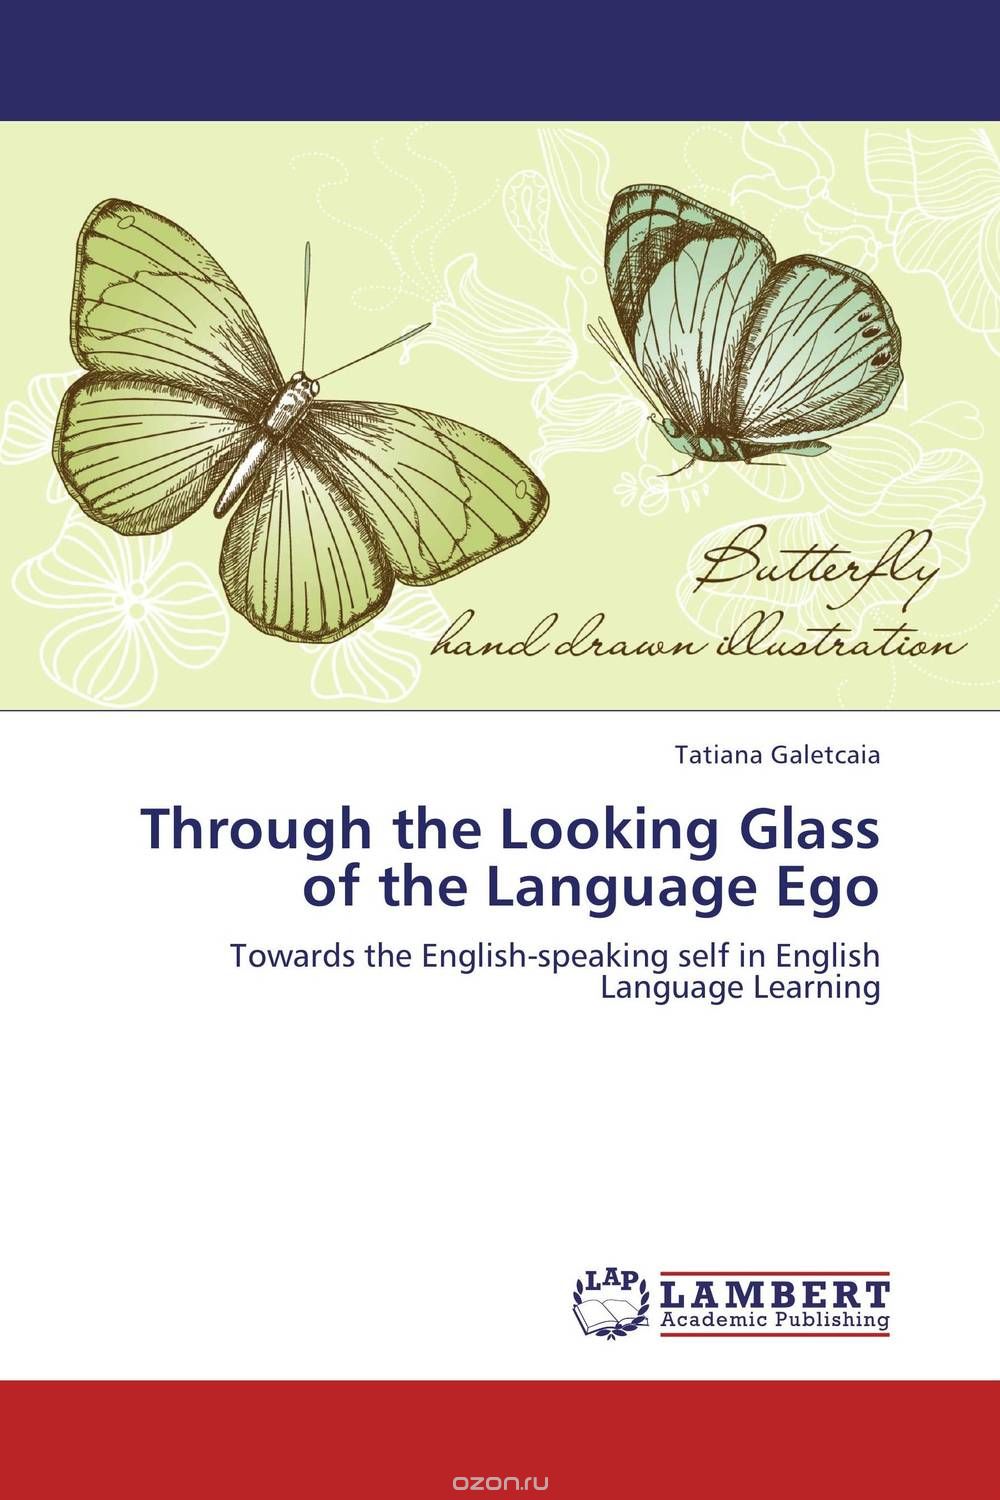 Through the Looking Glass of the Language Ego